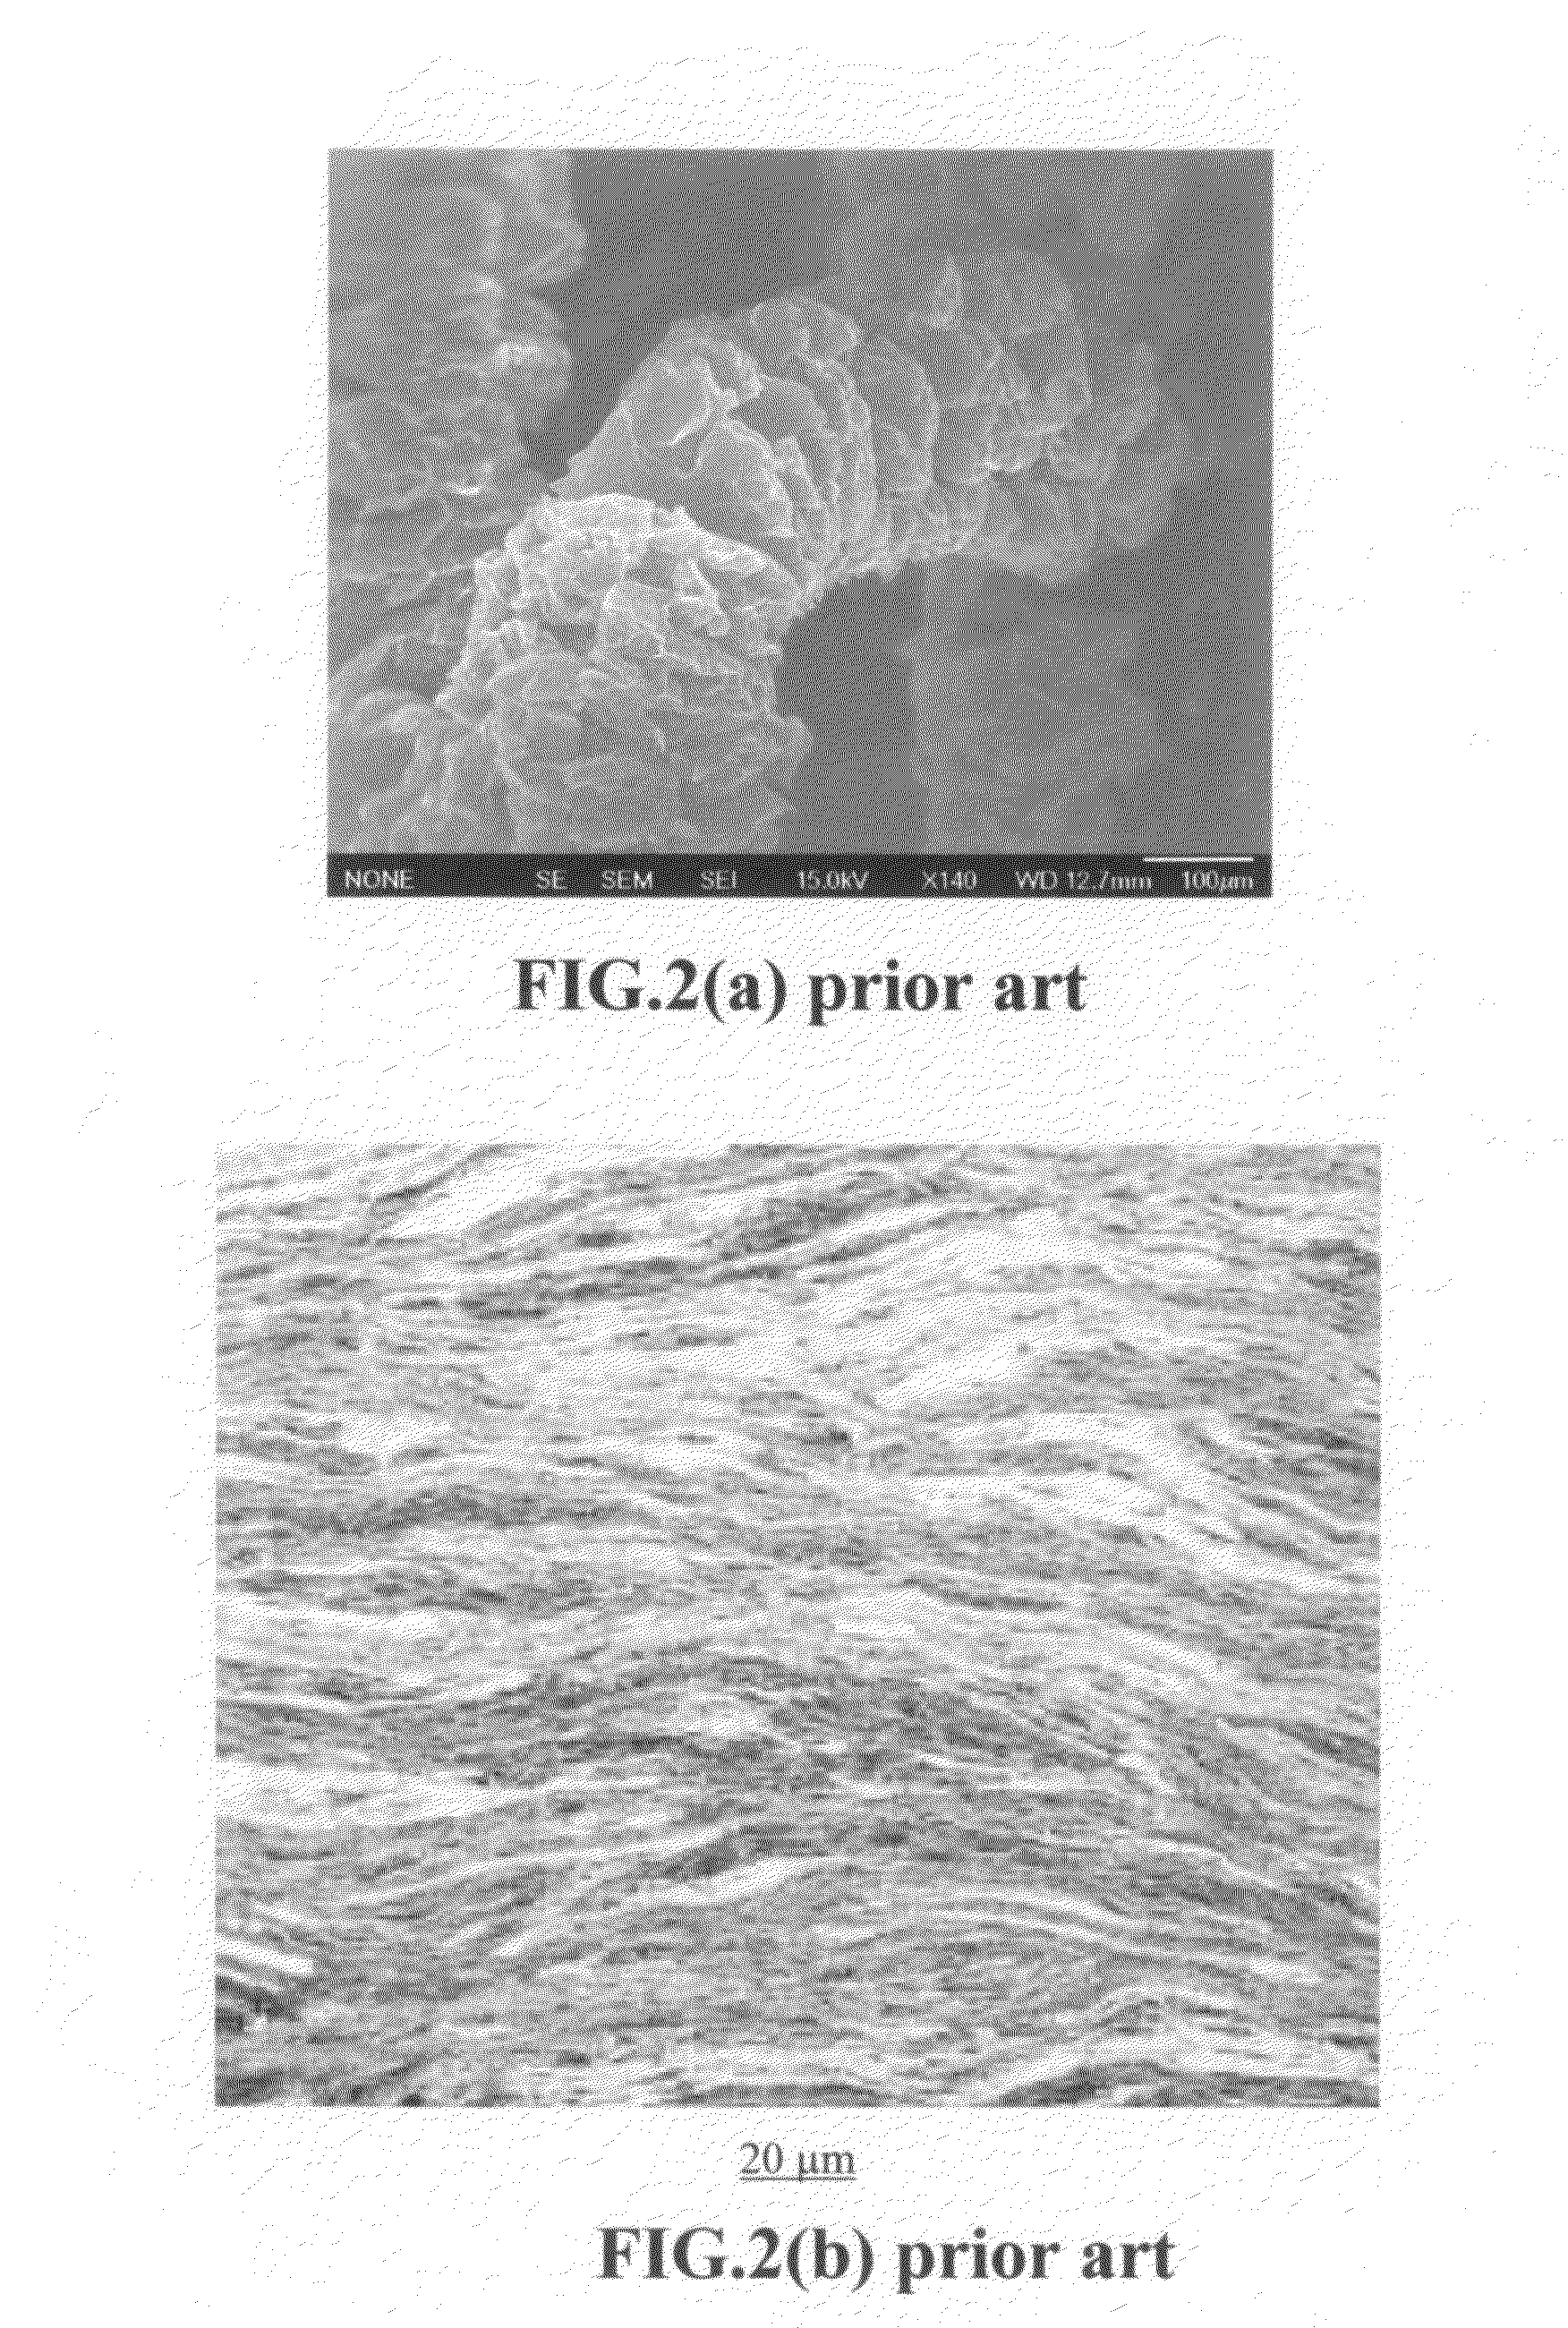 Graphene oxide-coated graphitic foil and processes for producing same